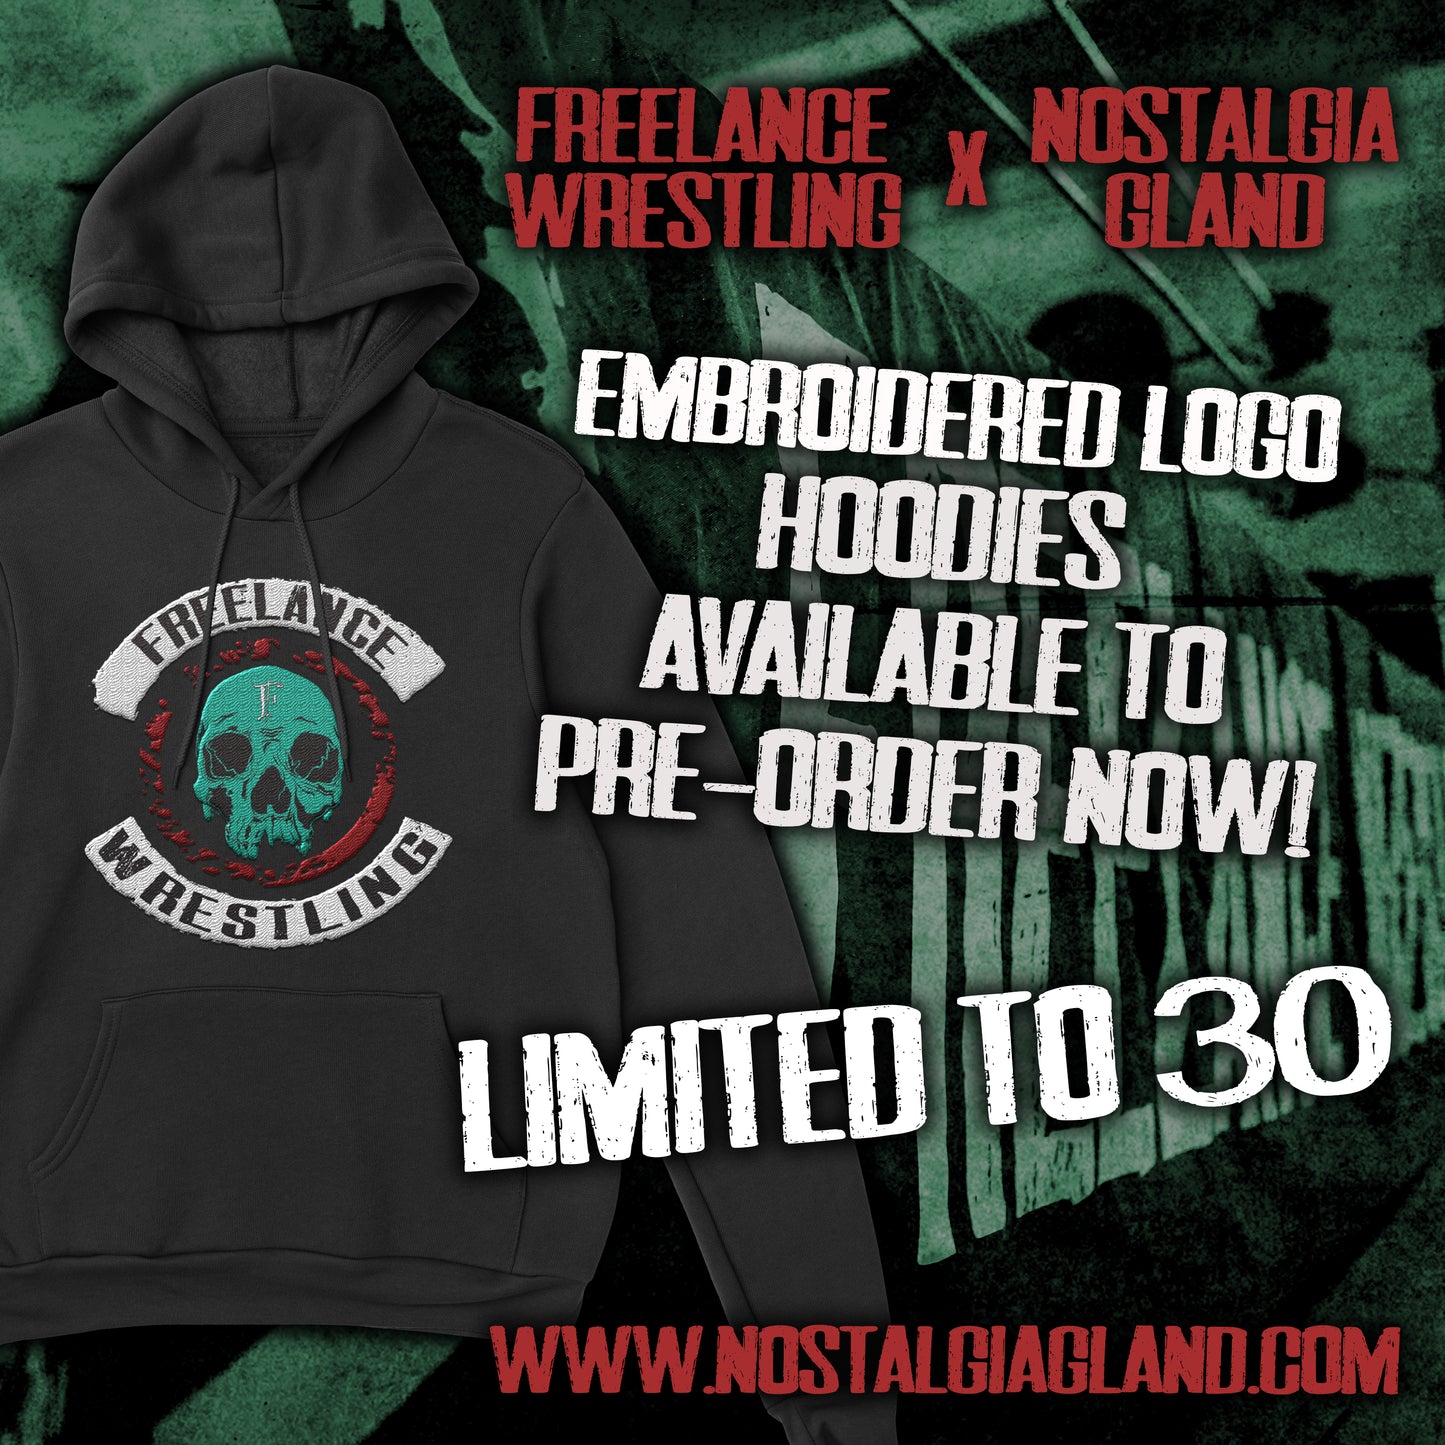 FREELANCE WRESTLING EMBROIDERED LOGO HOODIE PRE-ORDER *LIMITED TO 30*